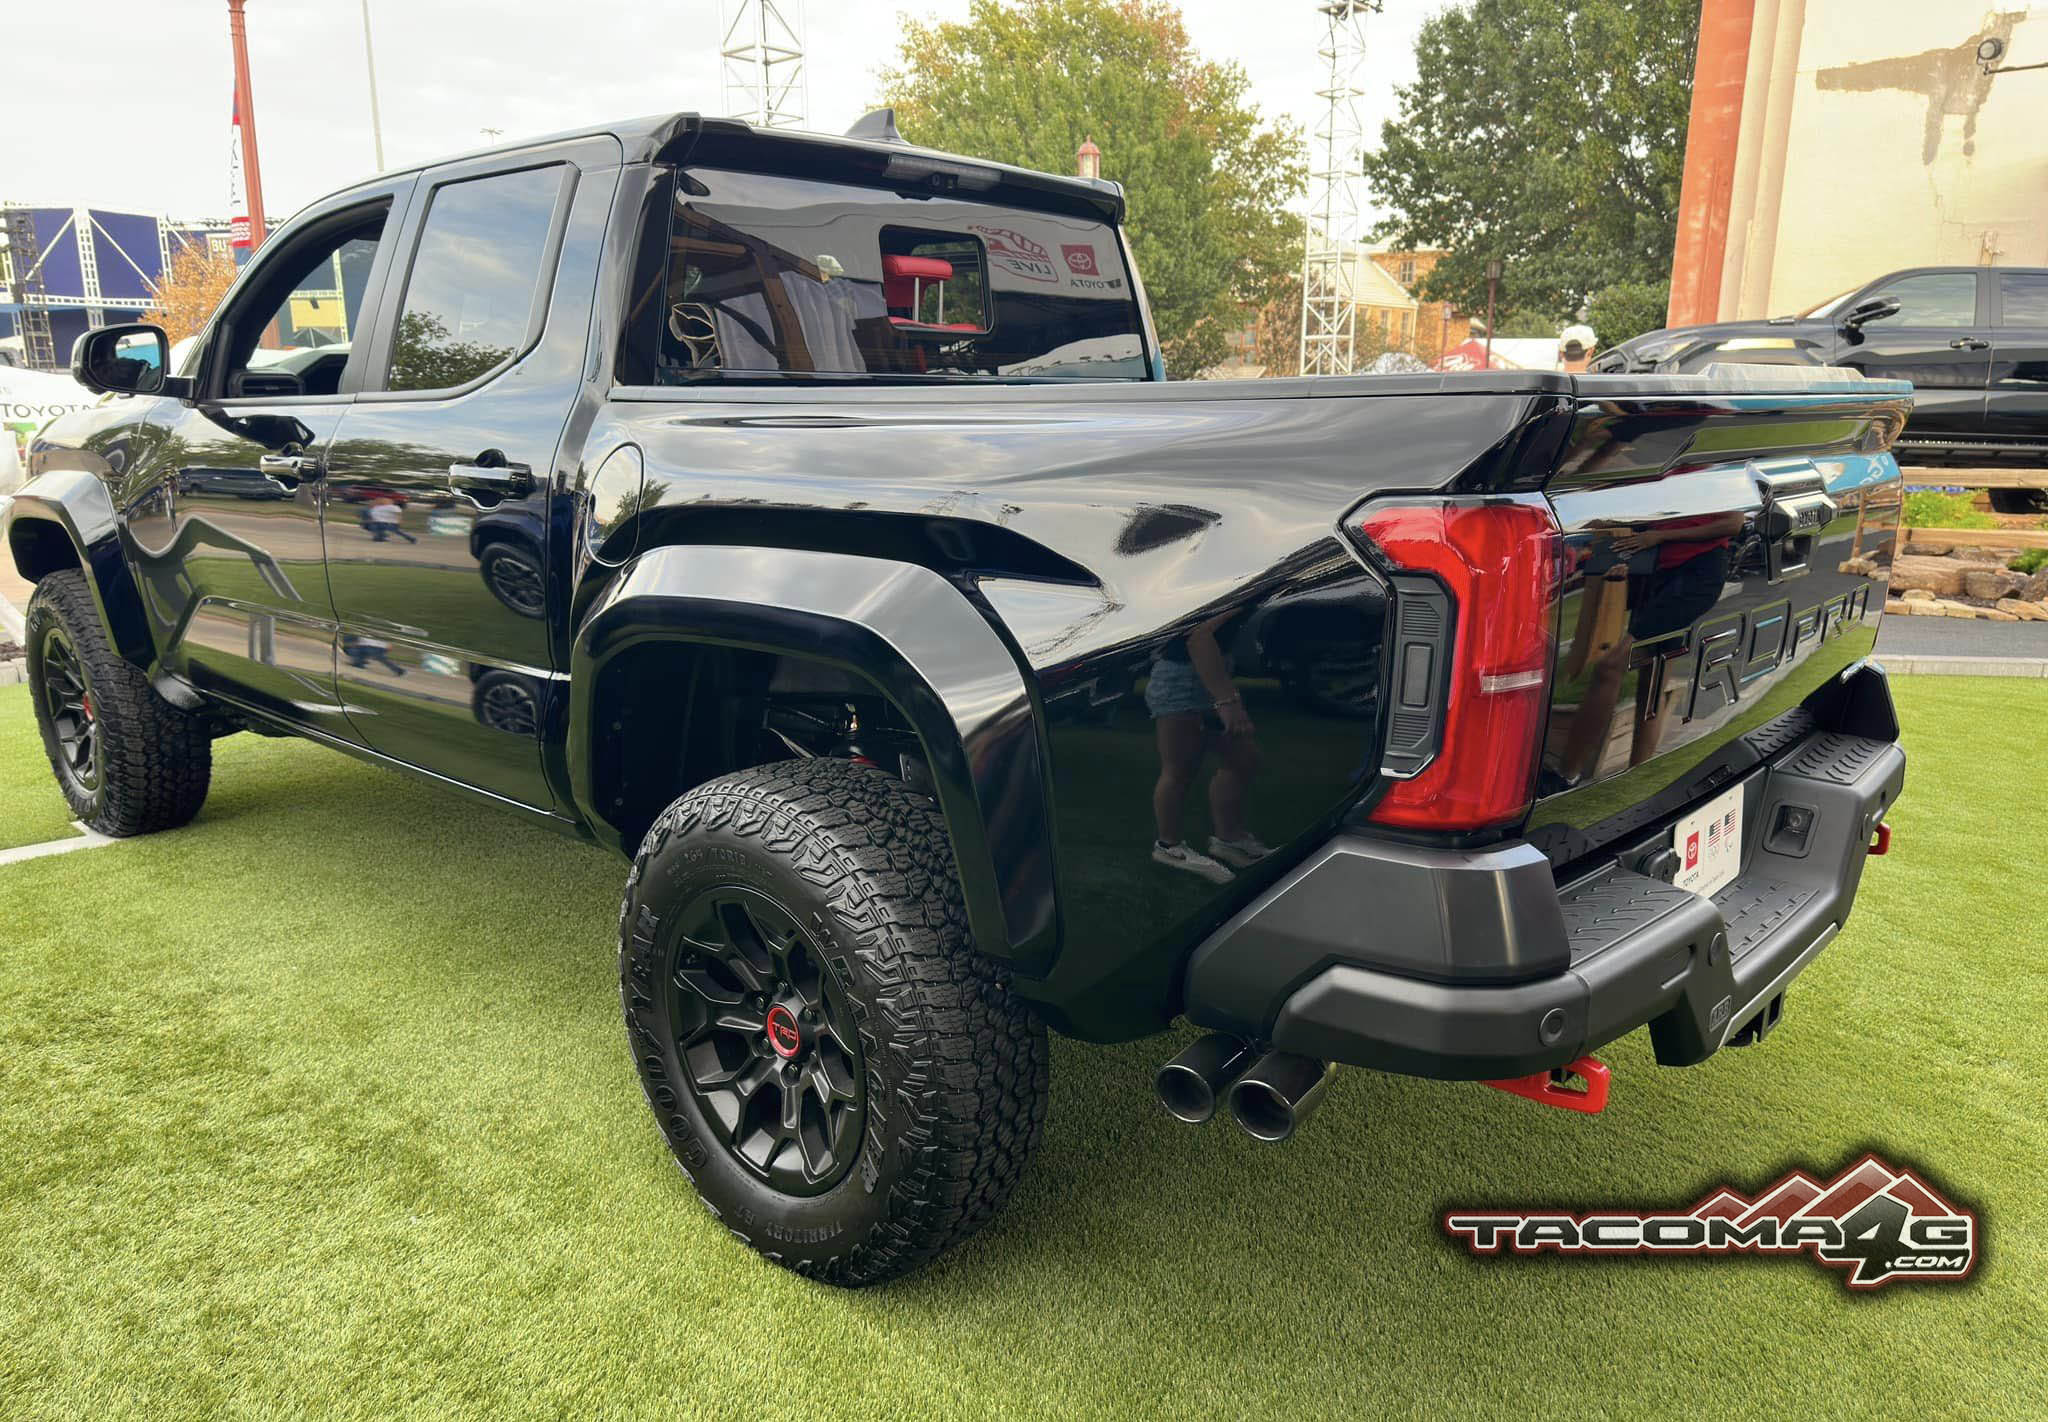 2024 Tacoma First Look: Black 2024 Tacoma TRD Pro. + Trailhunters in Black and Bronze Oxide Short Bed🤩 black-tacoma-trd-pro-red-interior-2024-model-2-